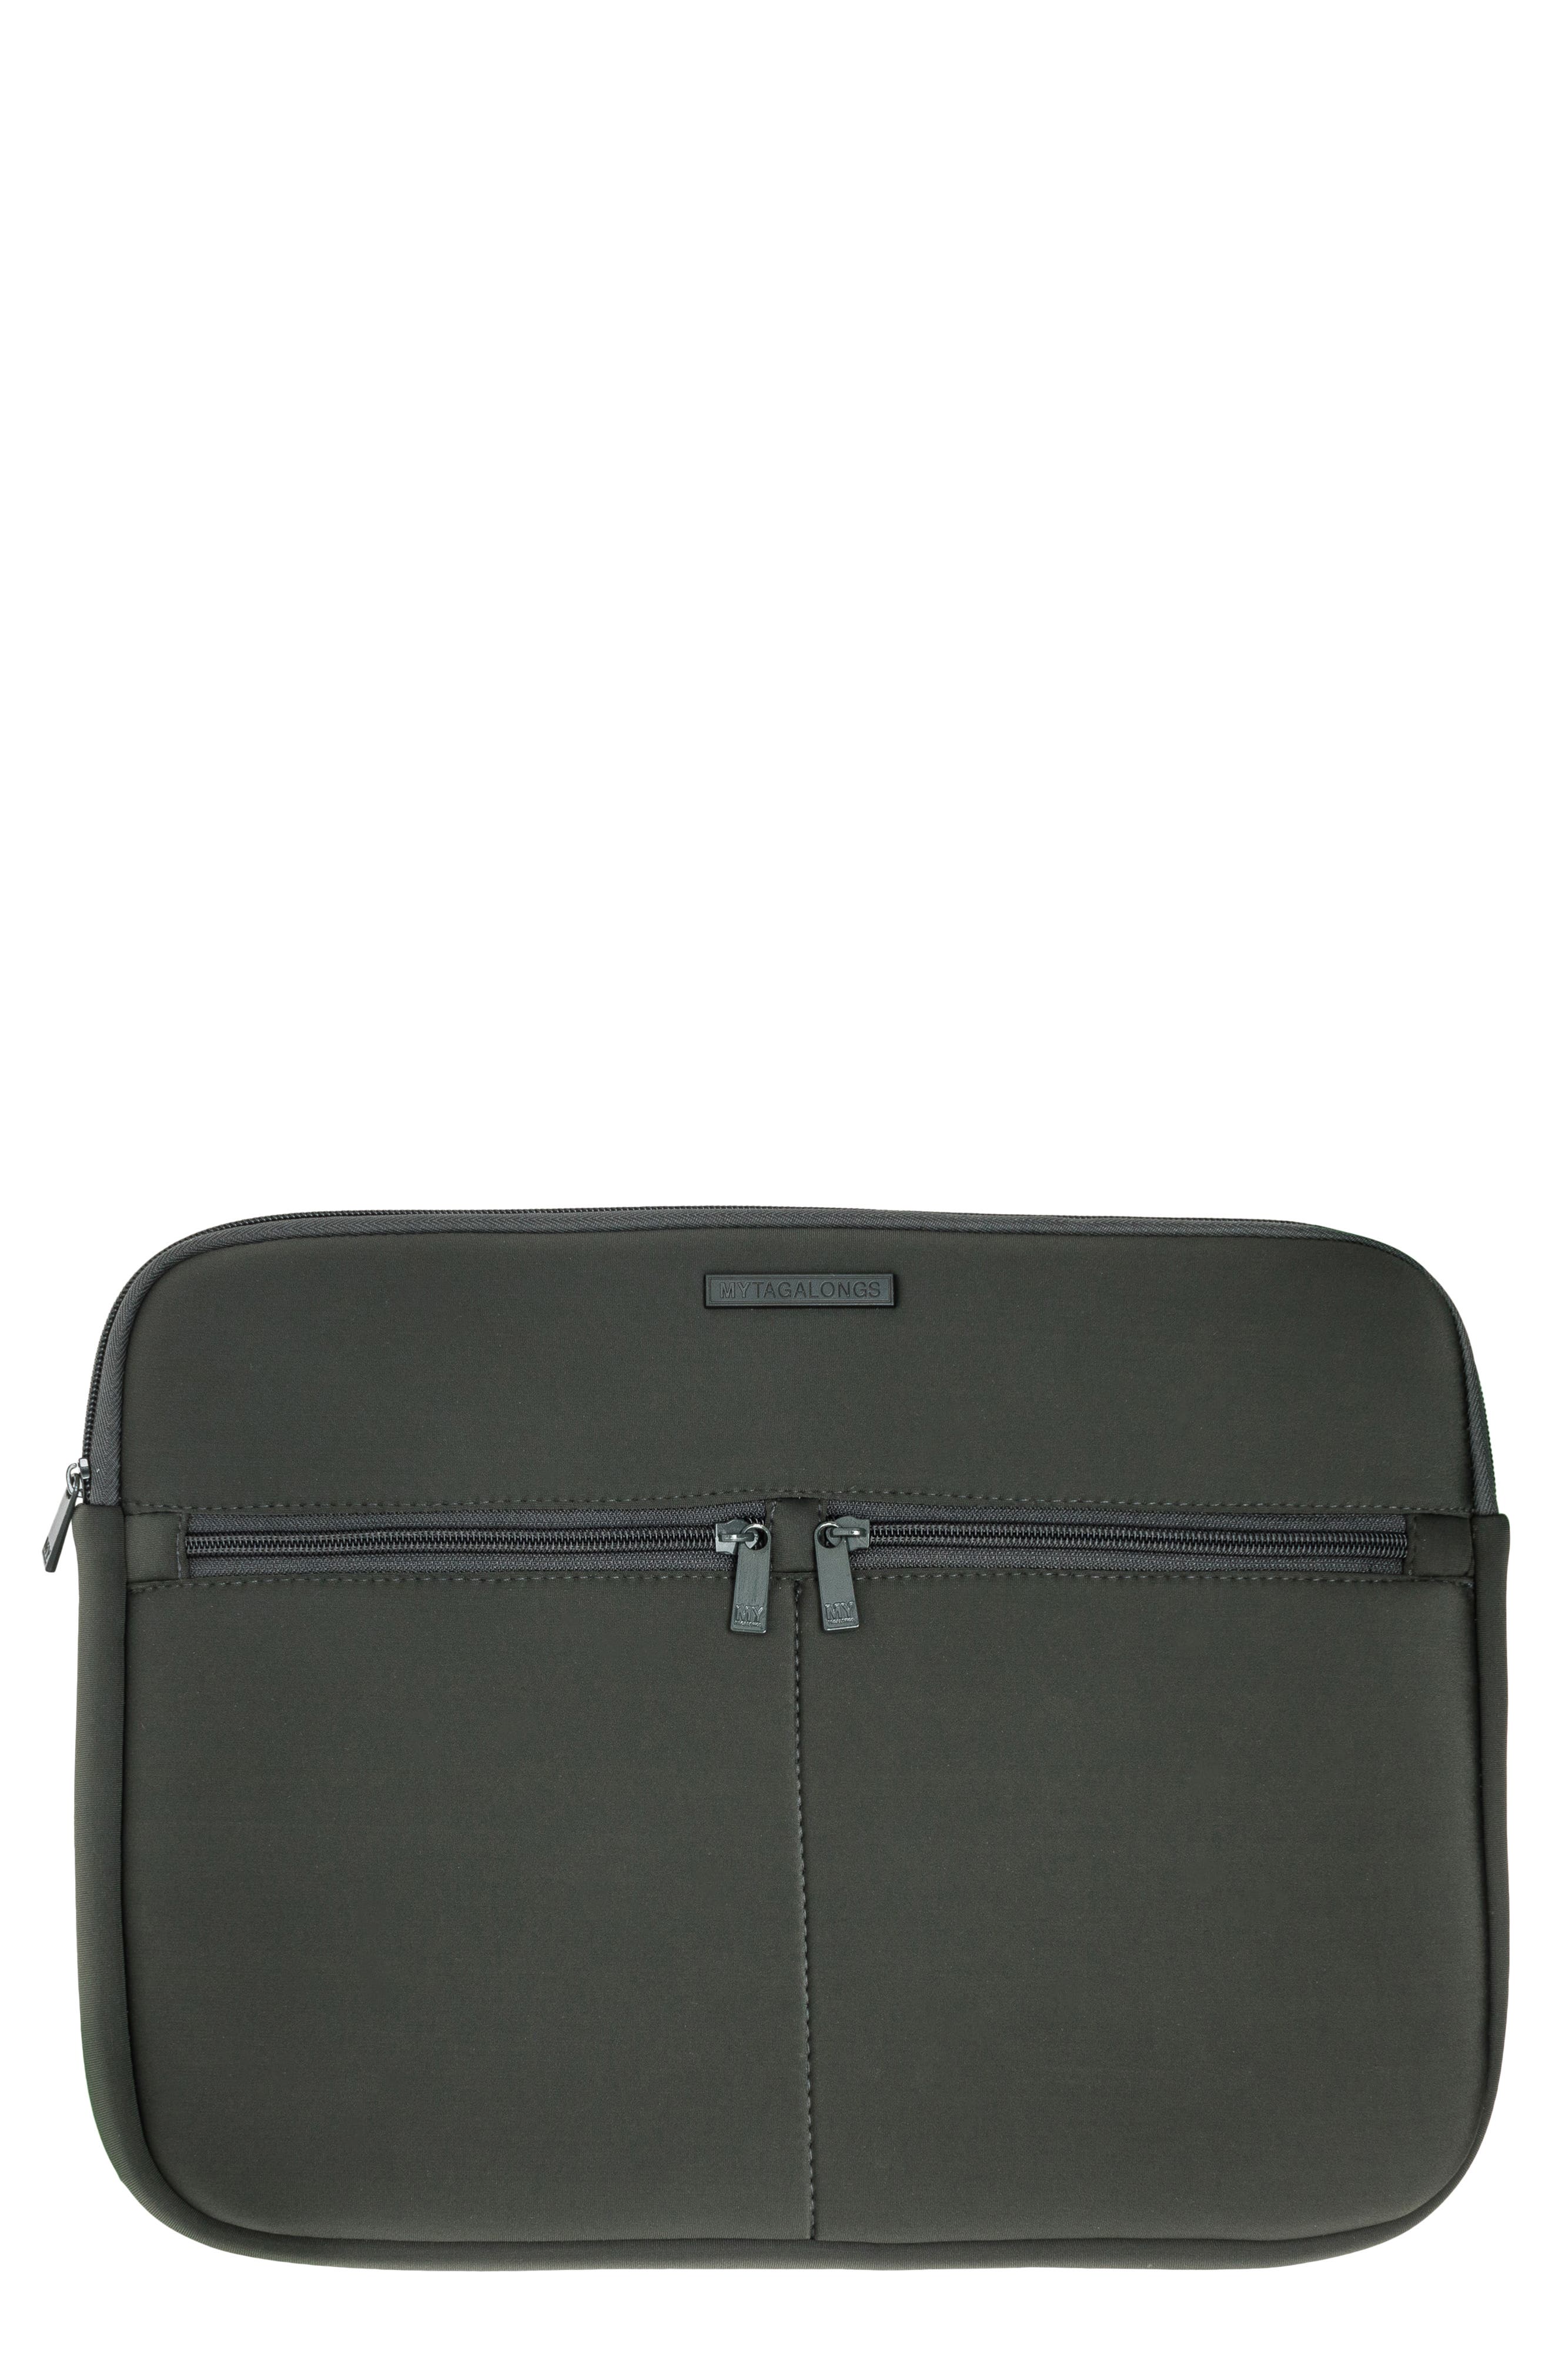 MYTAGALONGS Everleigh 15-Inch Laptop Sleeve in Hunter at Nordstrom